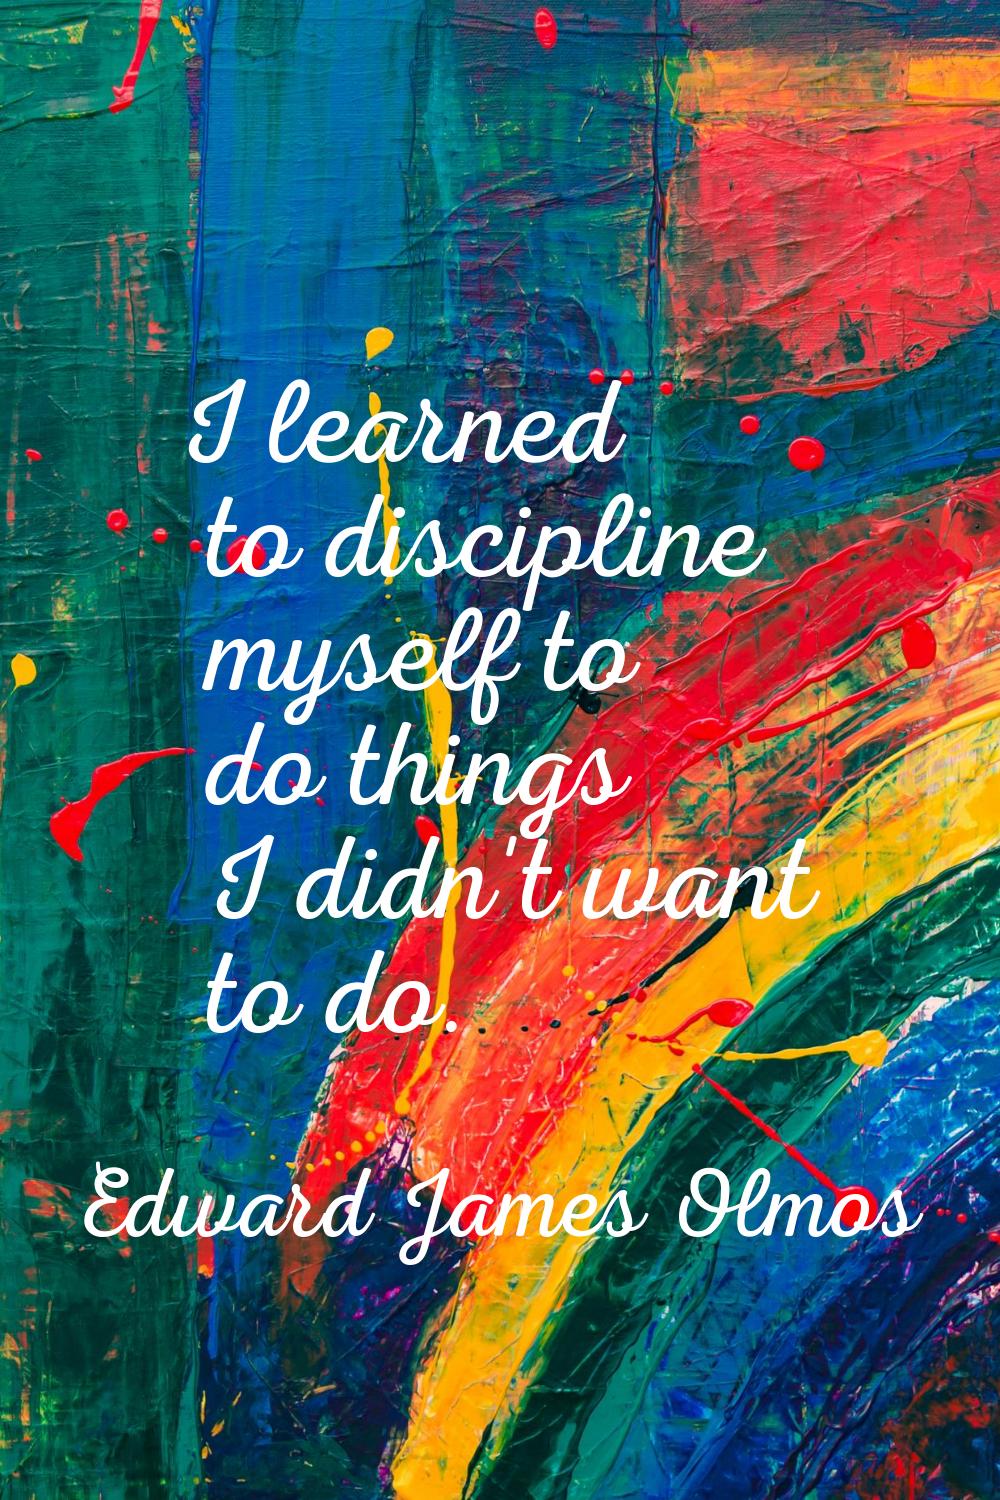 I learned to discipline myself to do things I didn't want to do.